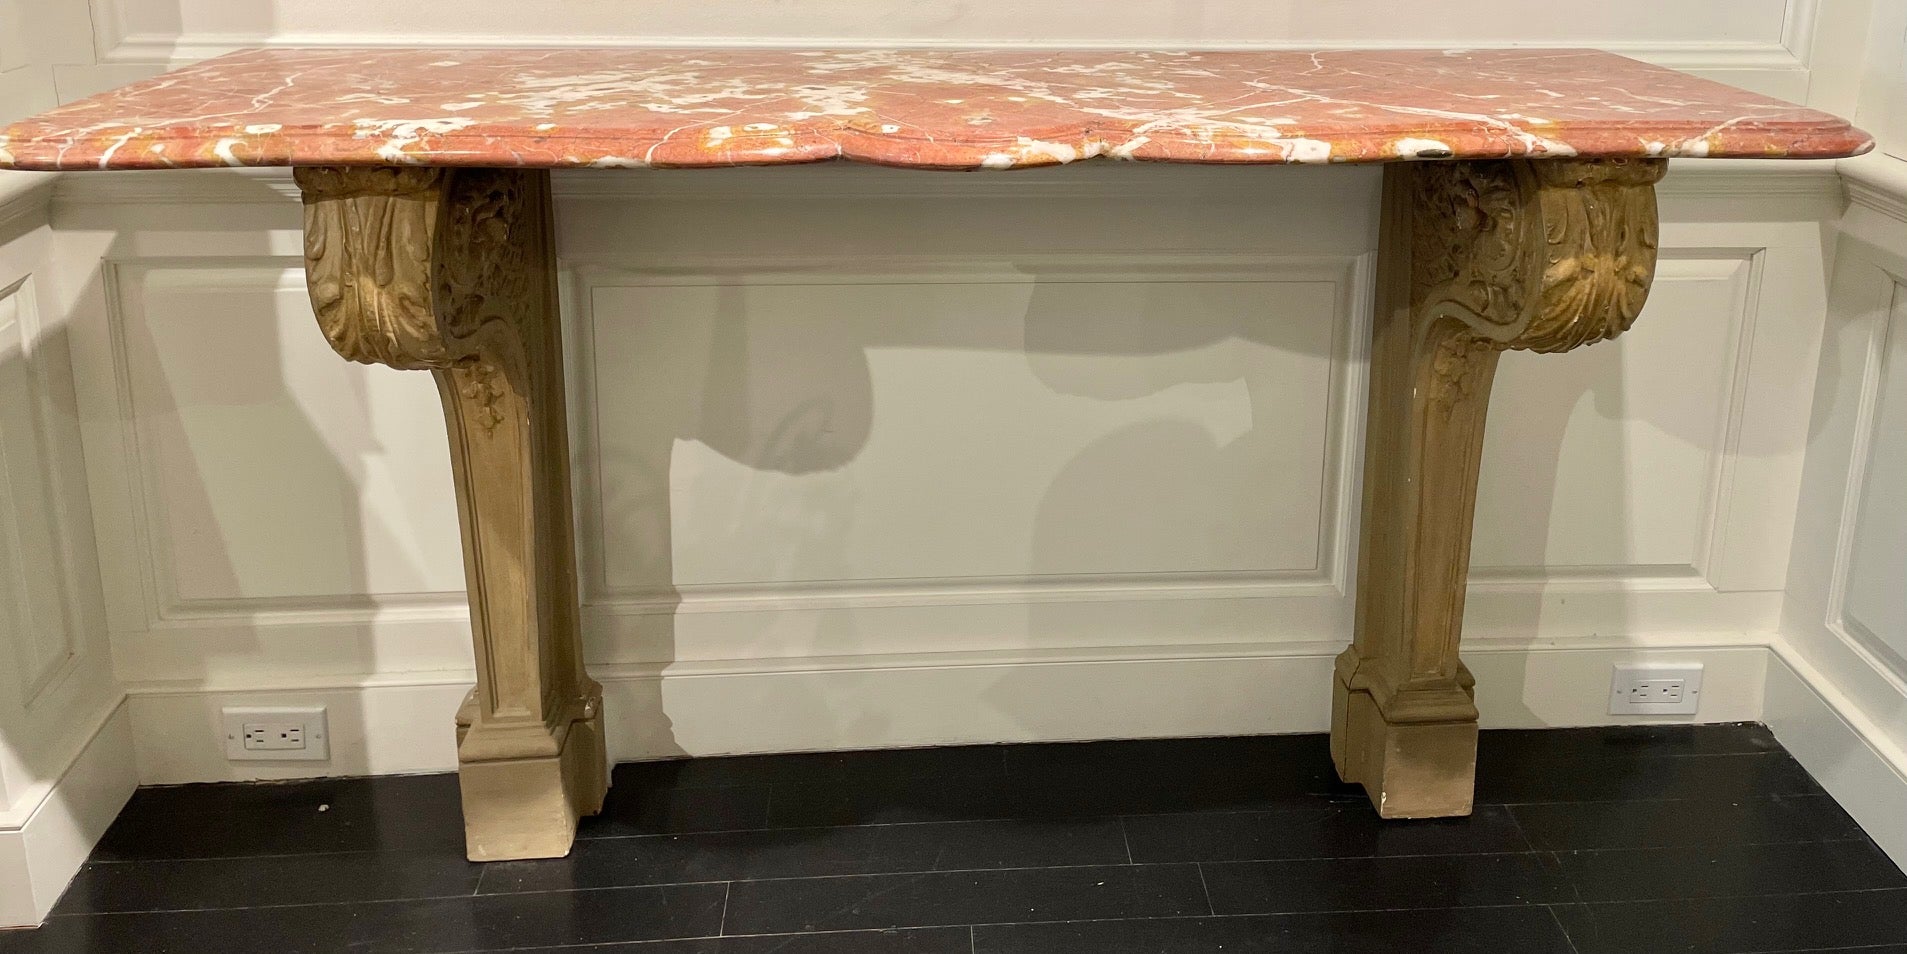 This stunning French console with a shaped breche d' alep marble top above elegant stone foliate carved supports was prominently displayed in Lee Radziwill's London residence for many years (see picture of the console off the main salon in her